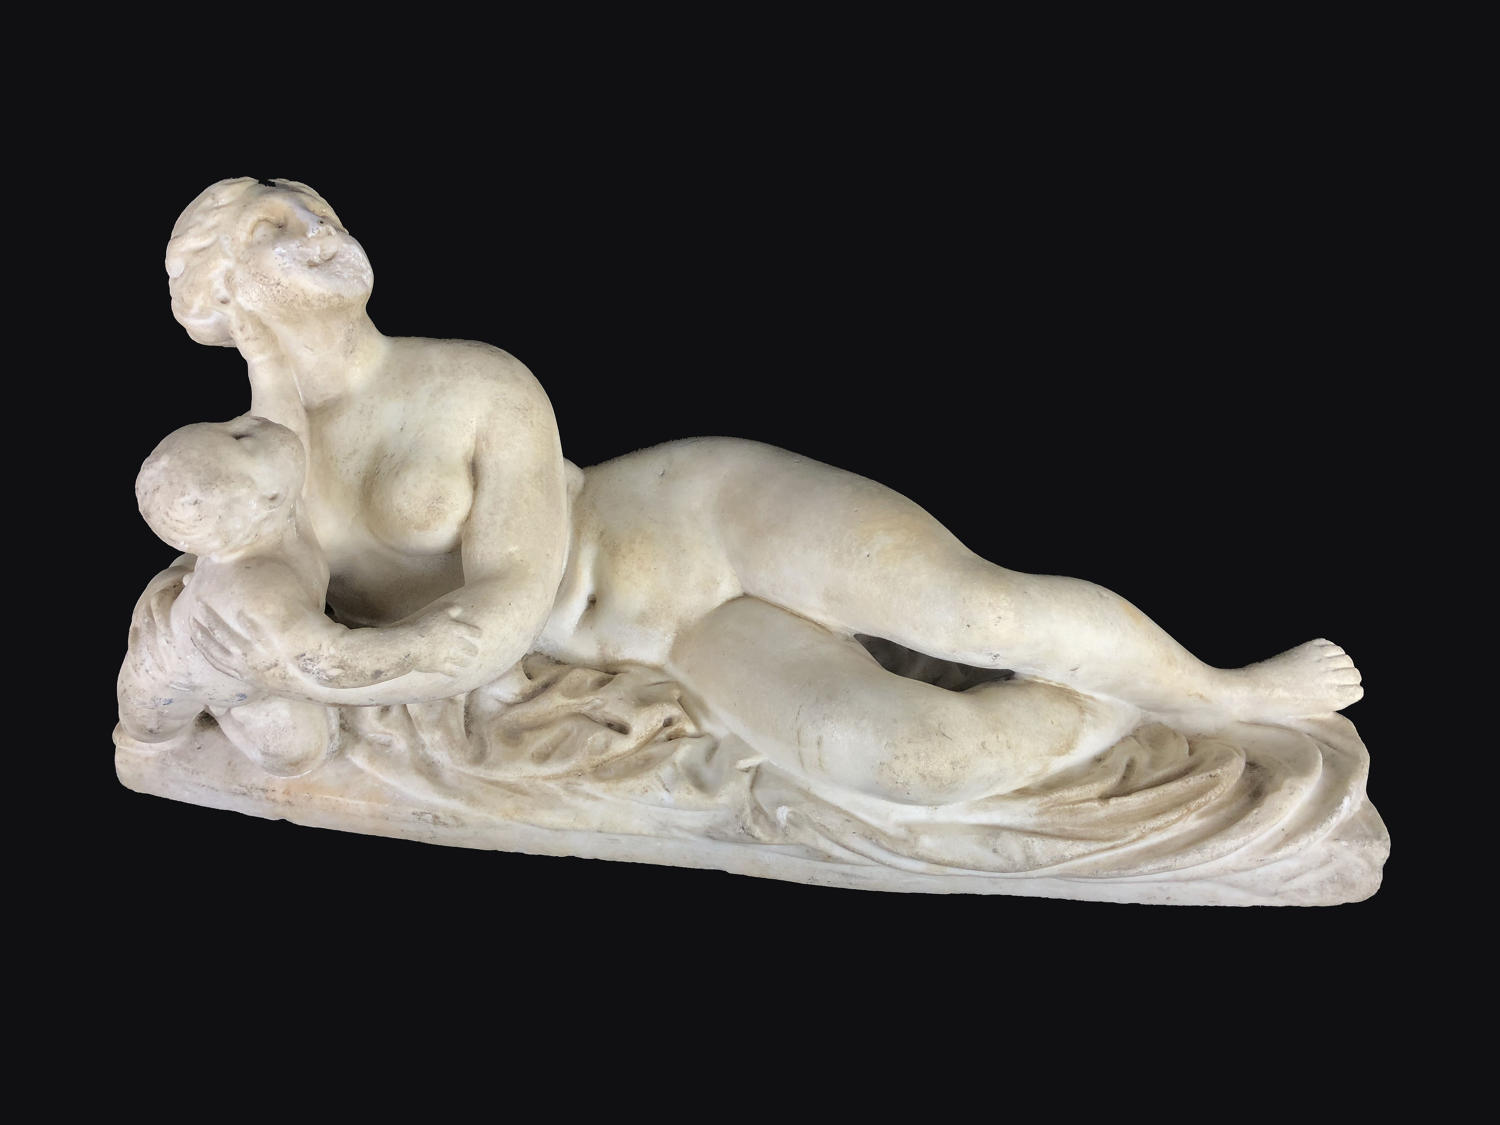 A plaster figure of a reclining woman and baby